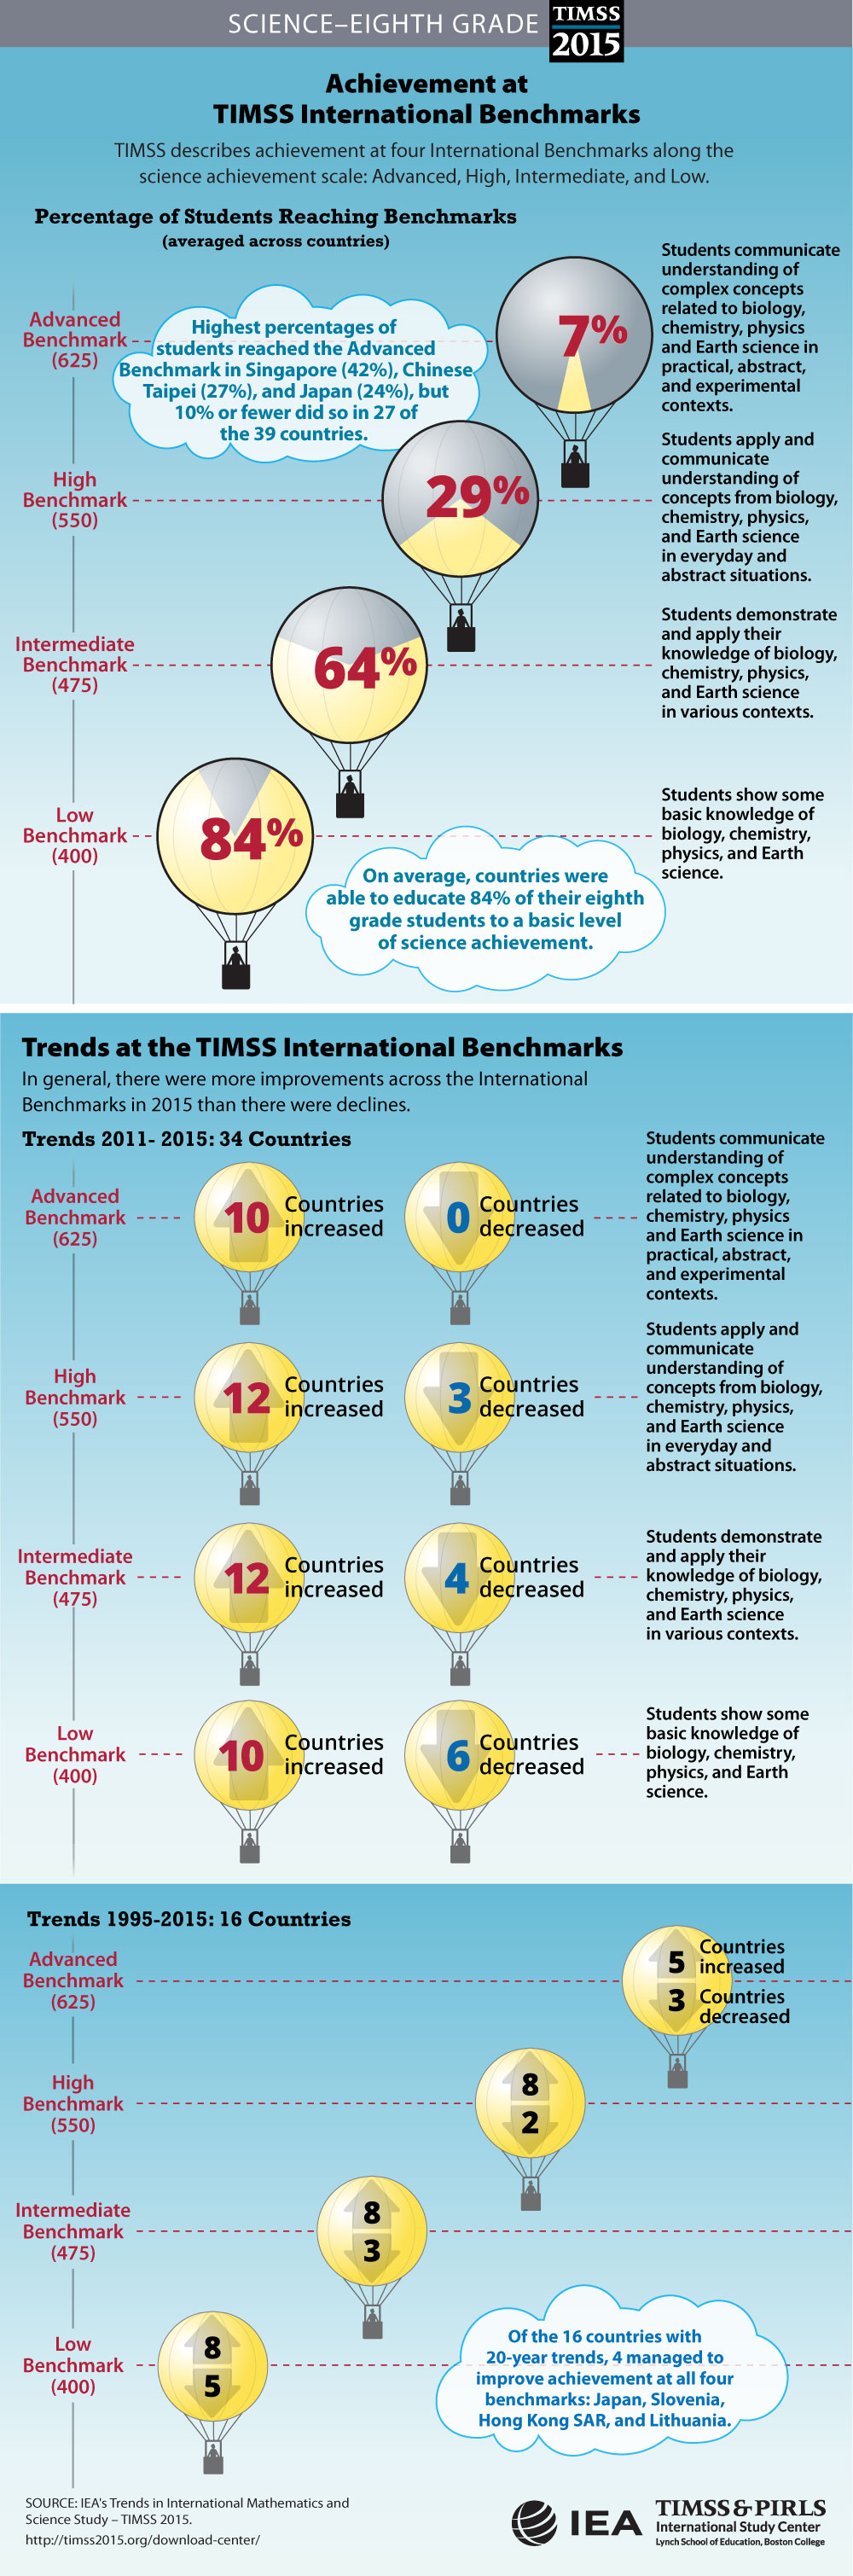 Performance at International Benchmarks Infographic (G8)